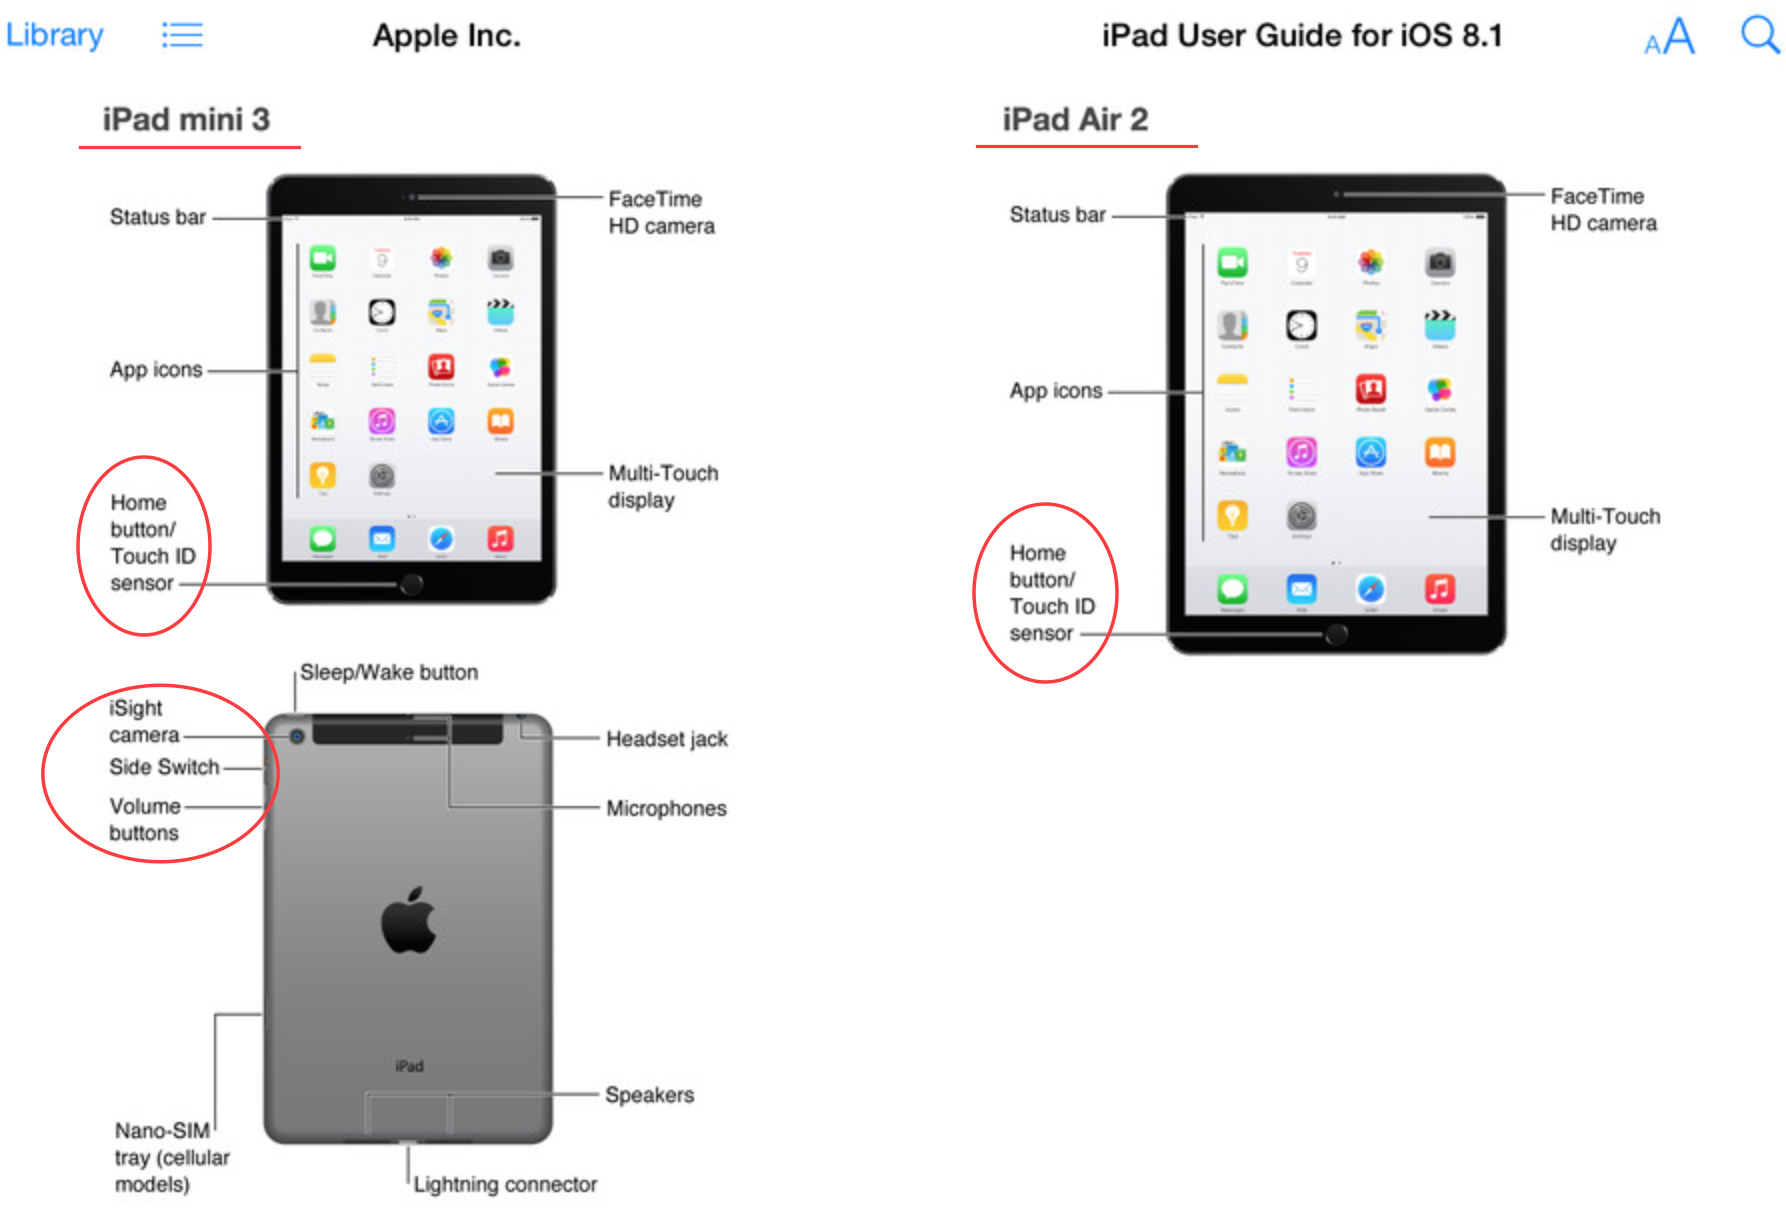 iPad Air 2' and 'iPad mini 3' with Touch ID & Burst Mode confirmed